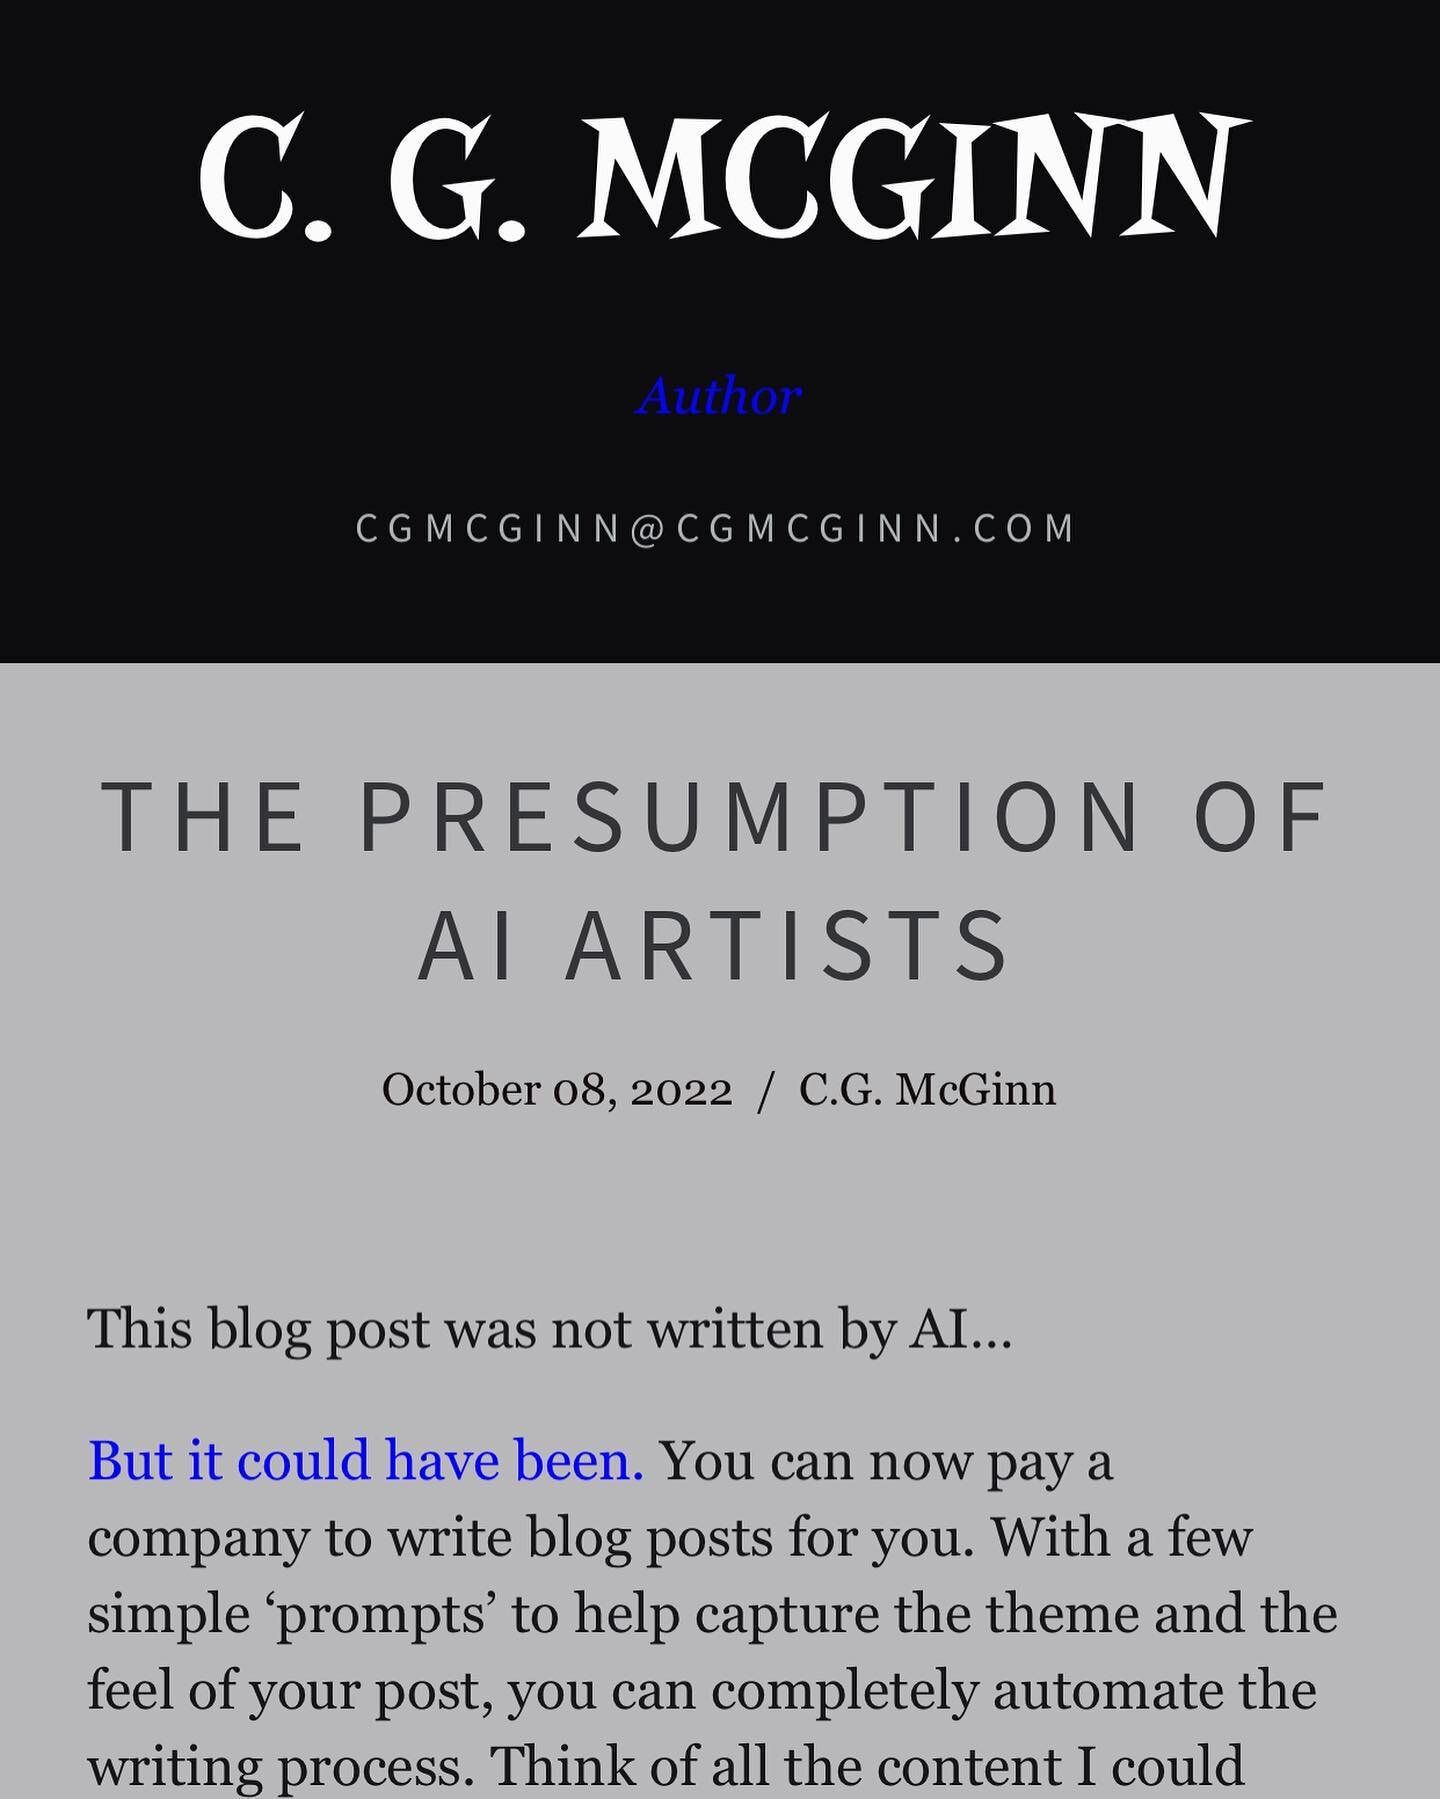 Hey look! A new blog post! Talking about AI art and such.
.
.
.
.
.
.

#writers #writersofinstagram #writerscommunity #writer #writing #writingcommunity #writersofig #poems #art #author #story #write #midjourney #aiart #ai